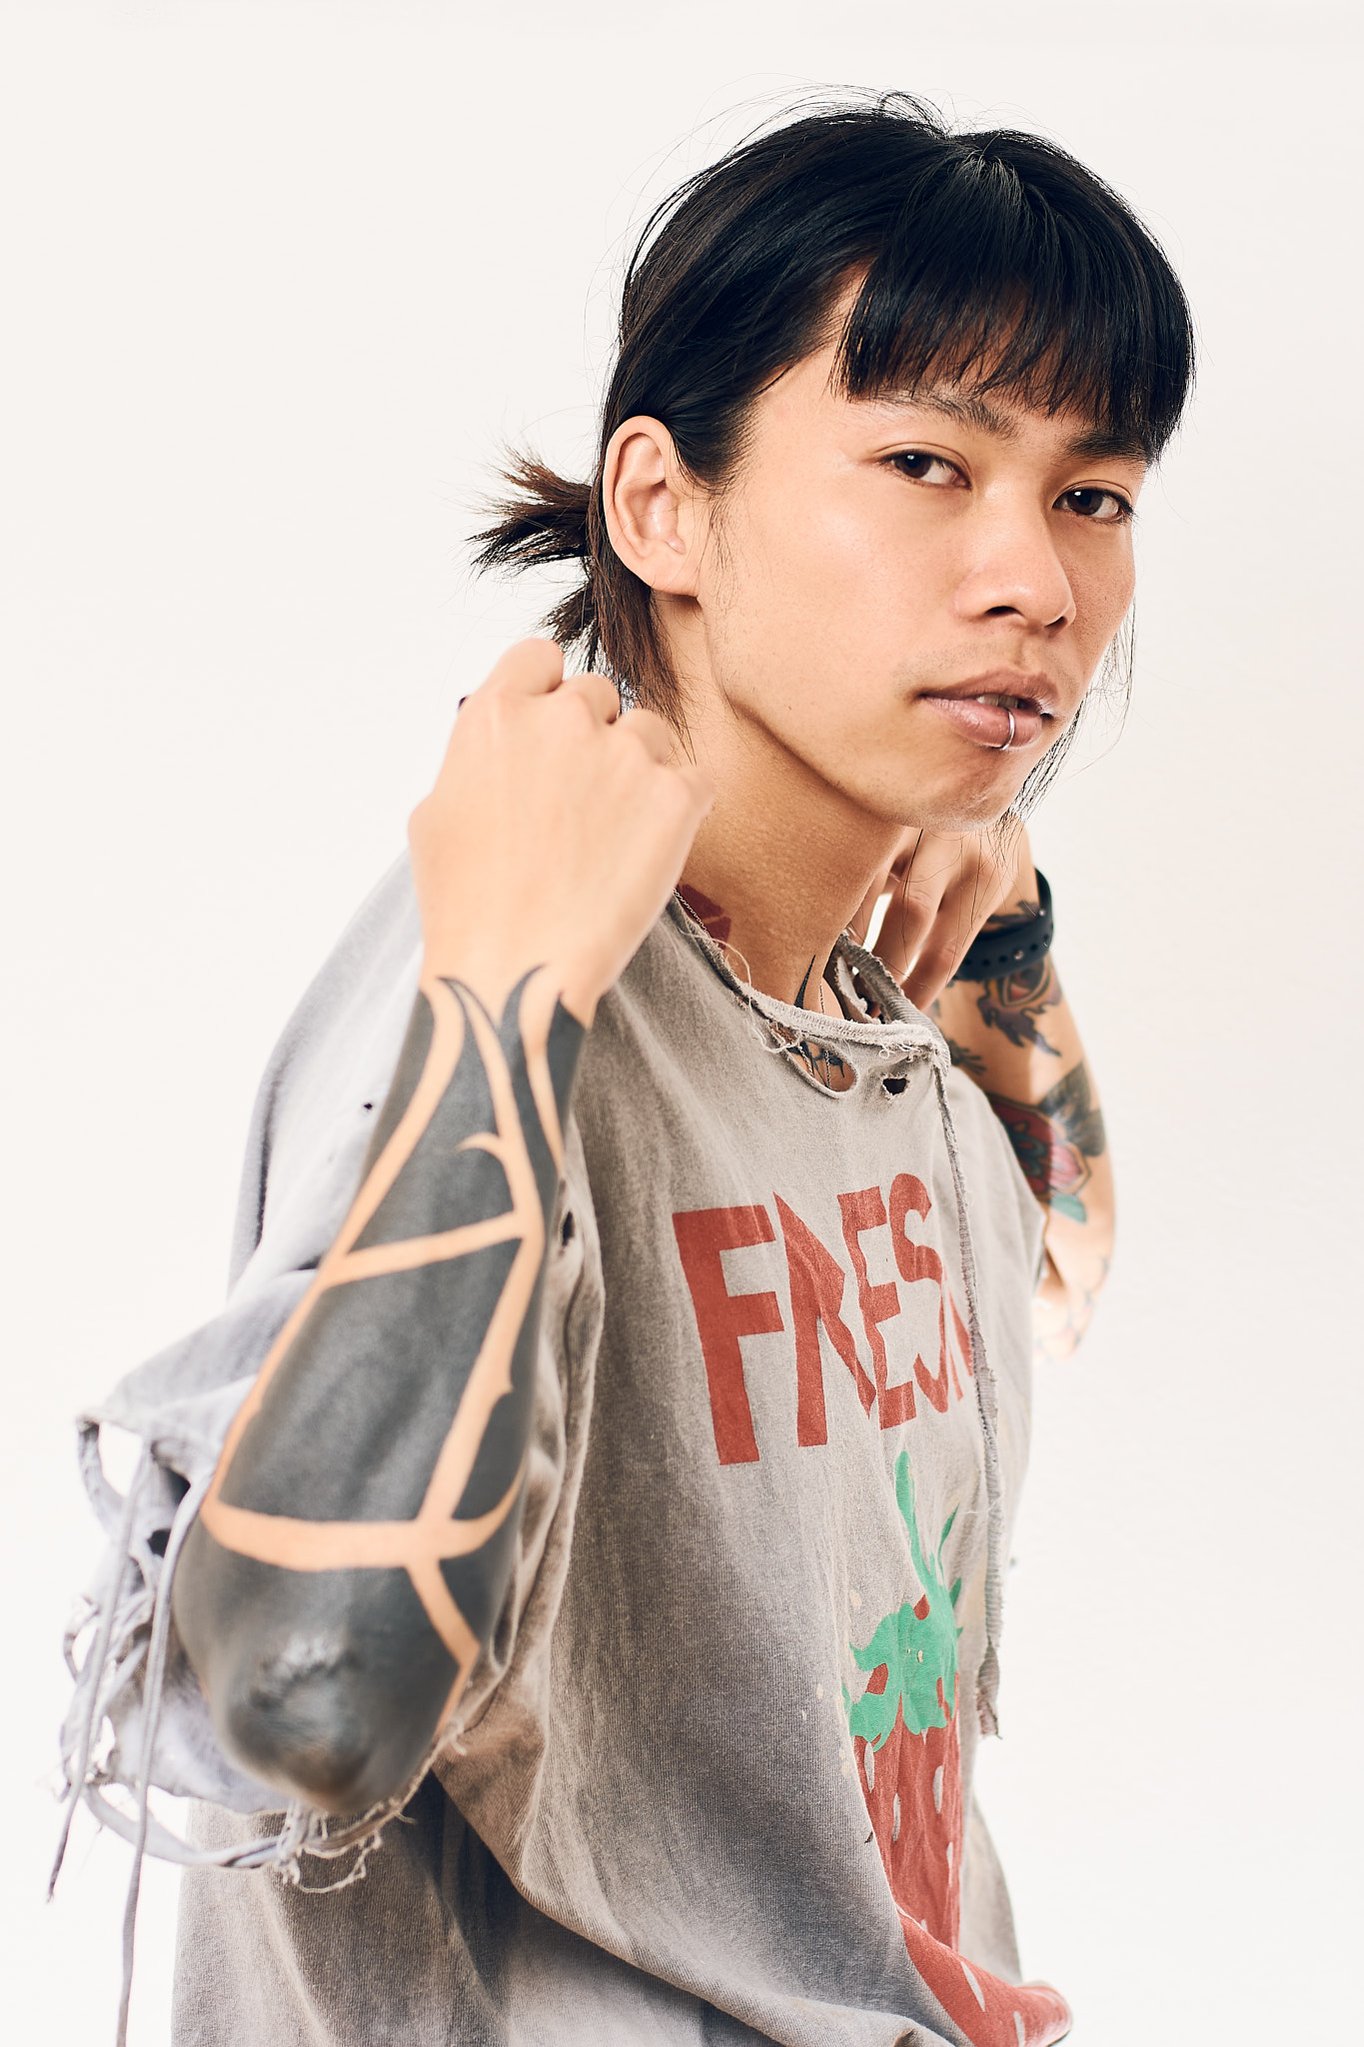 Portrait of a Japanese man with tattooed arms and his hands on his shoulders.